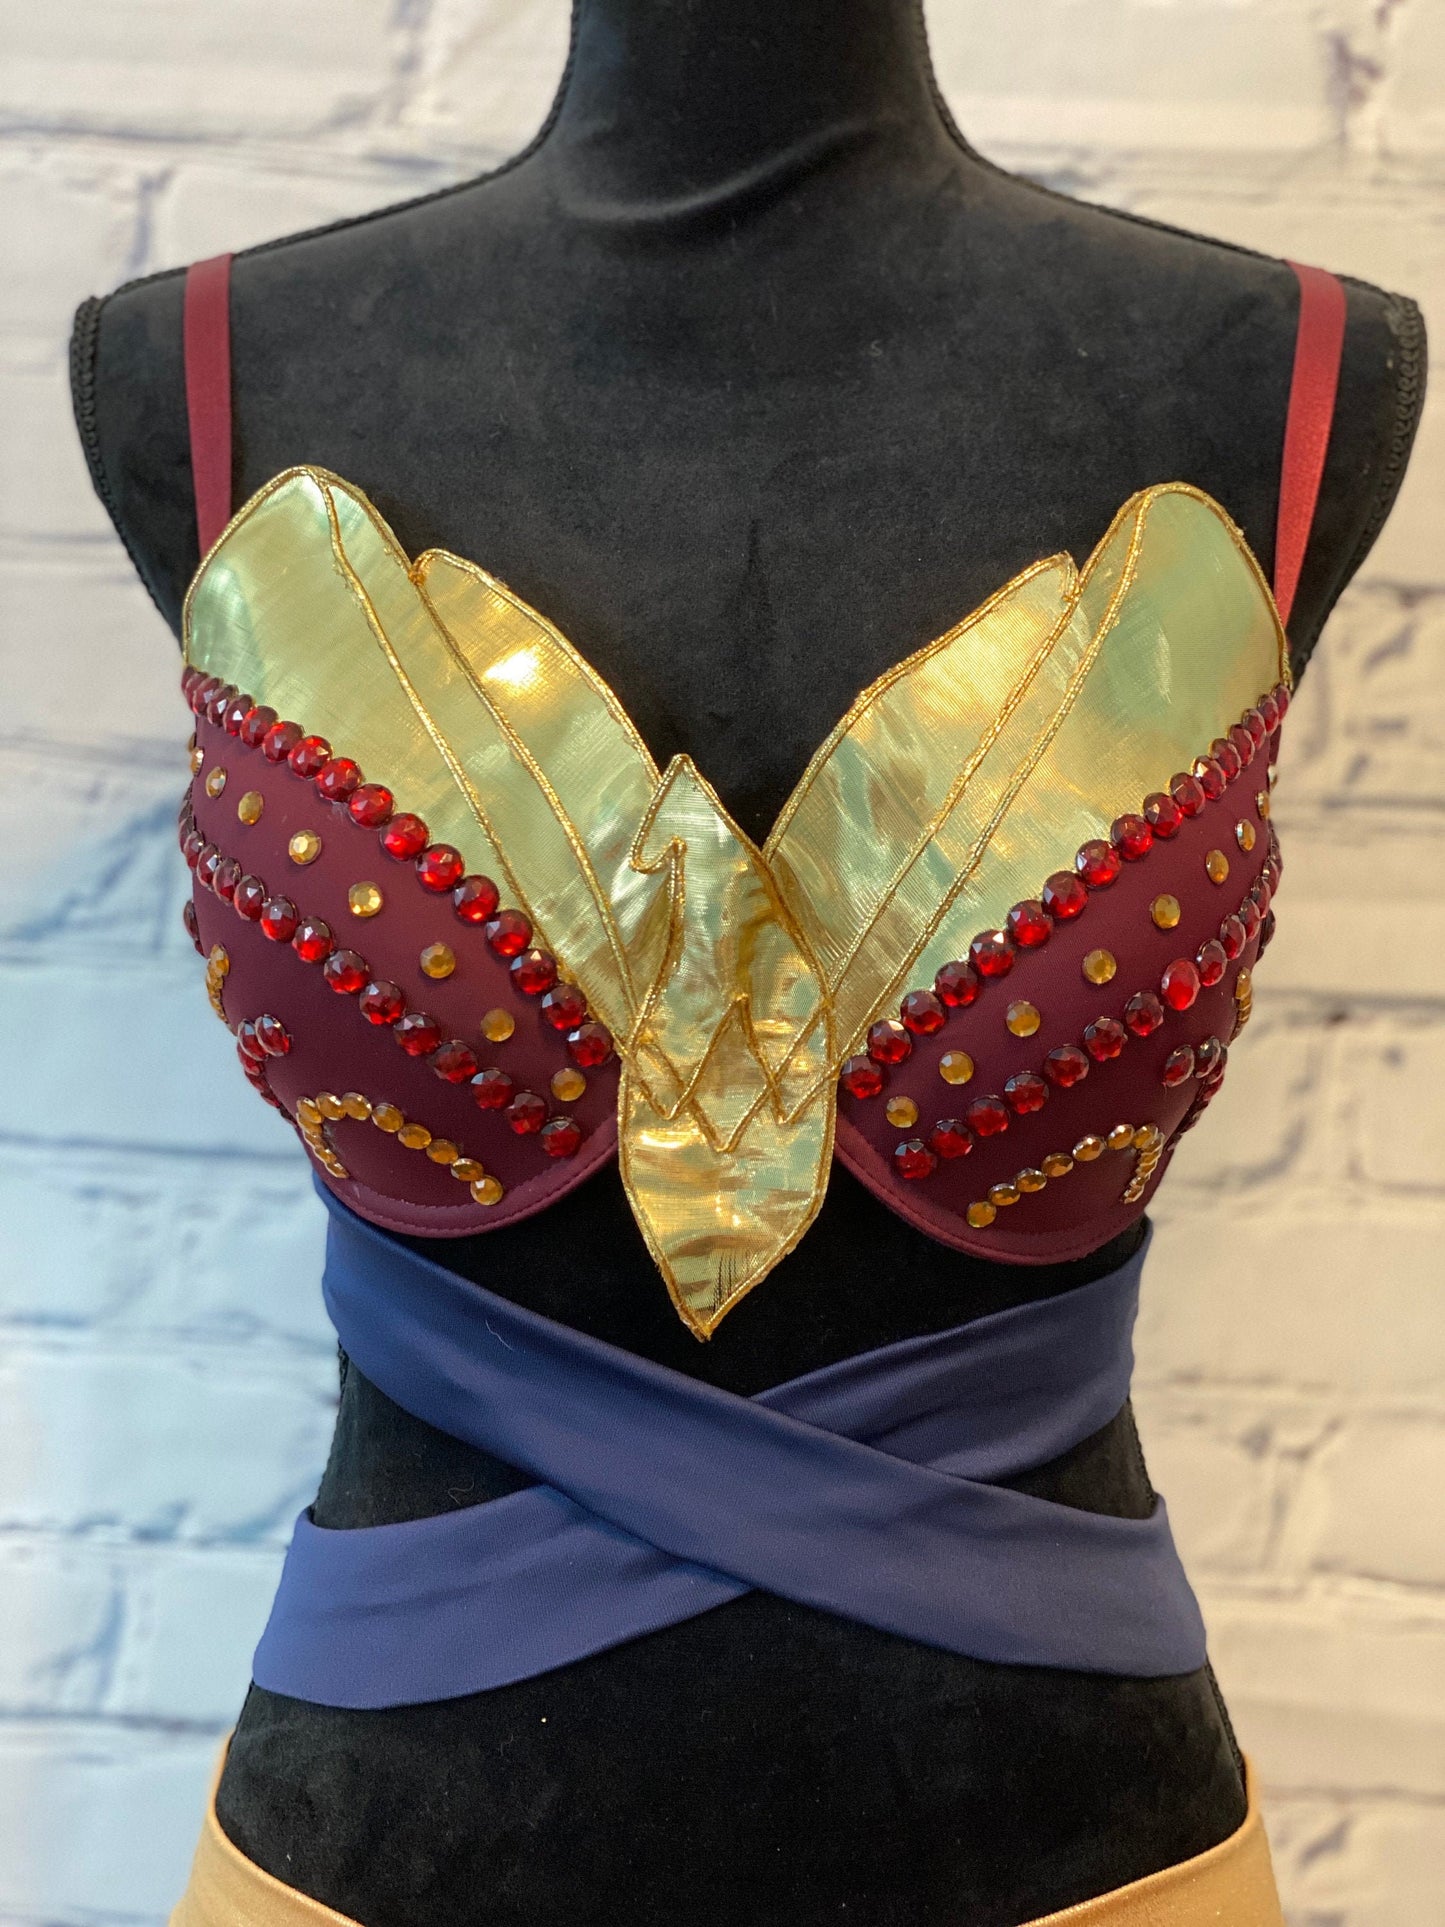 DC's Wonder Woman Movie Inspired Rave Bra - Perfect for a Rave Outfit, edm  Bra, Exotic Dance Bra, edm Outfit, Rave Wear, EDC Bra, EDC Outfit